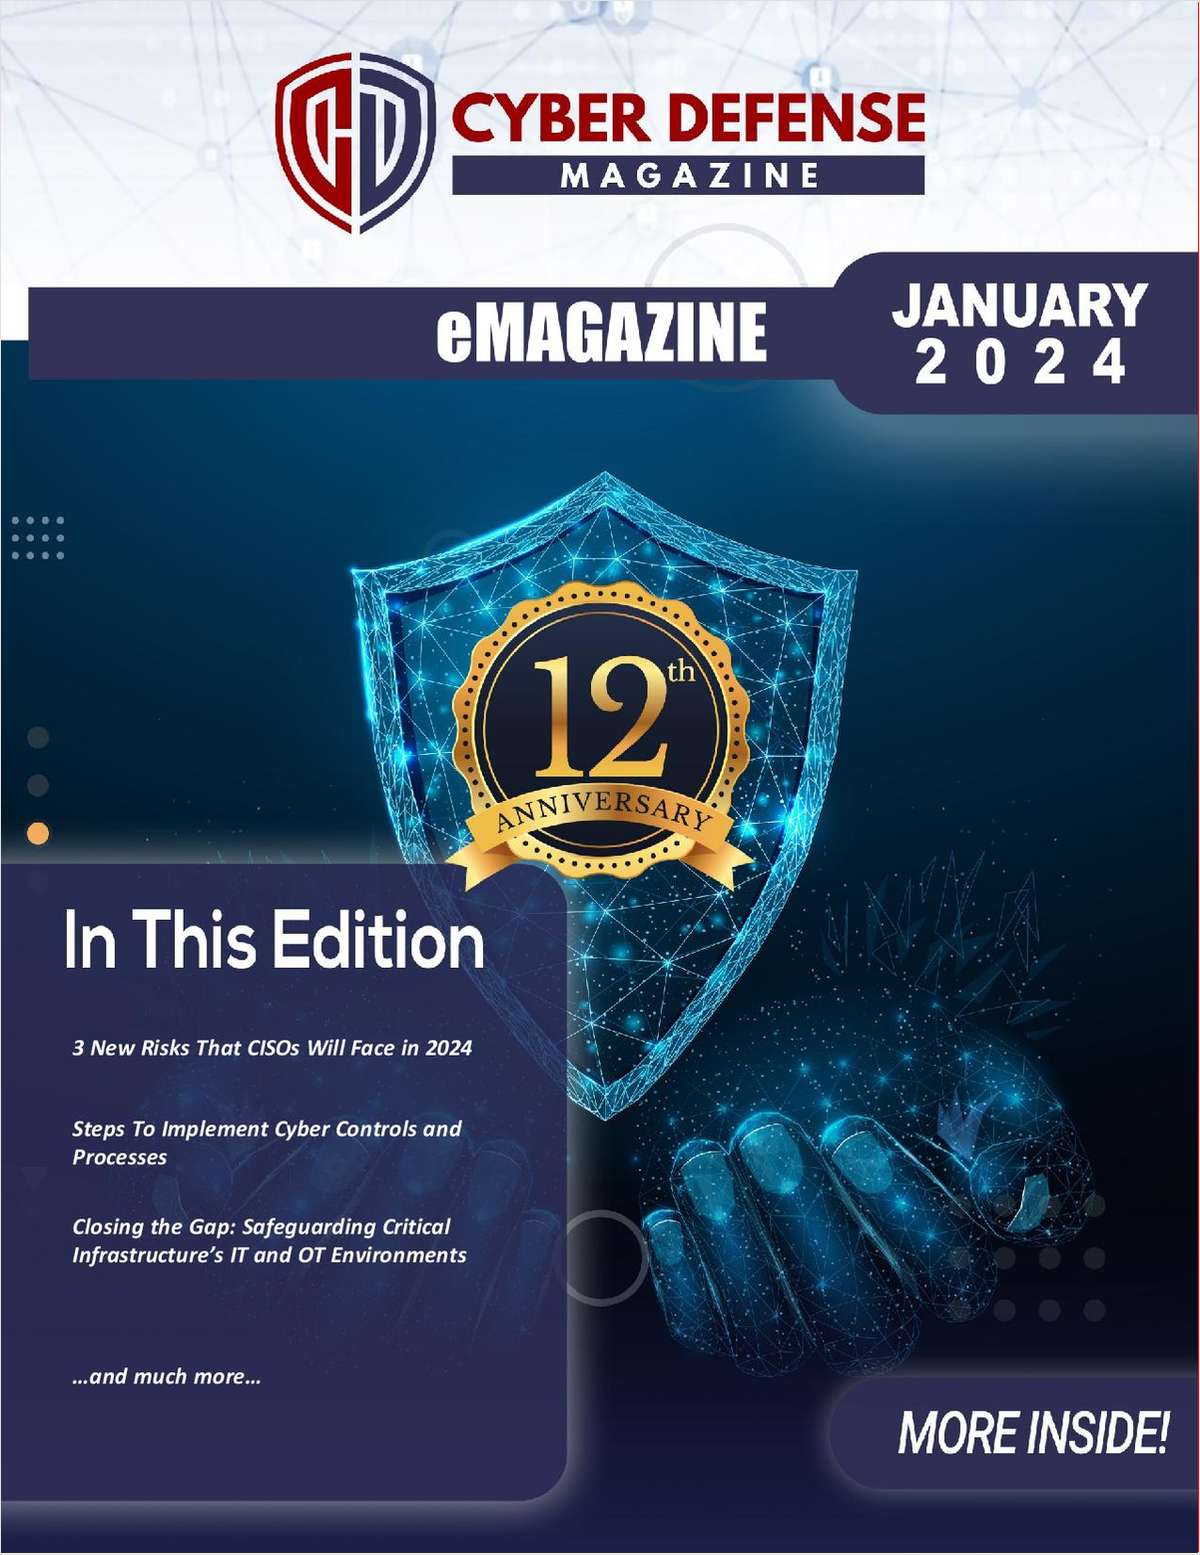 Cyber Defense Magazine January Edition for 2024